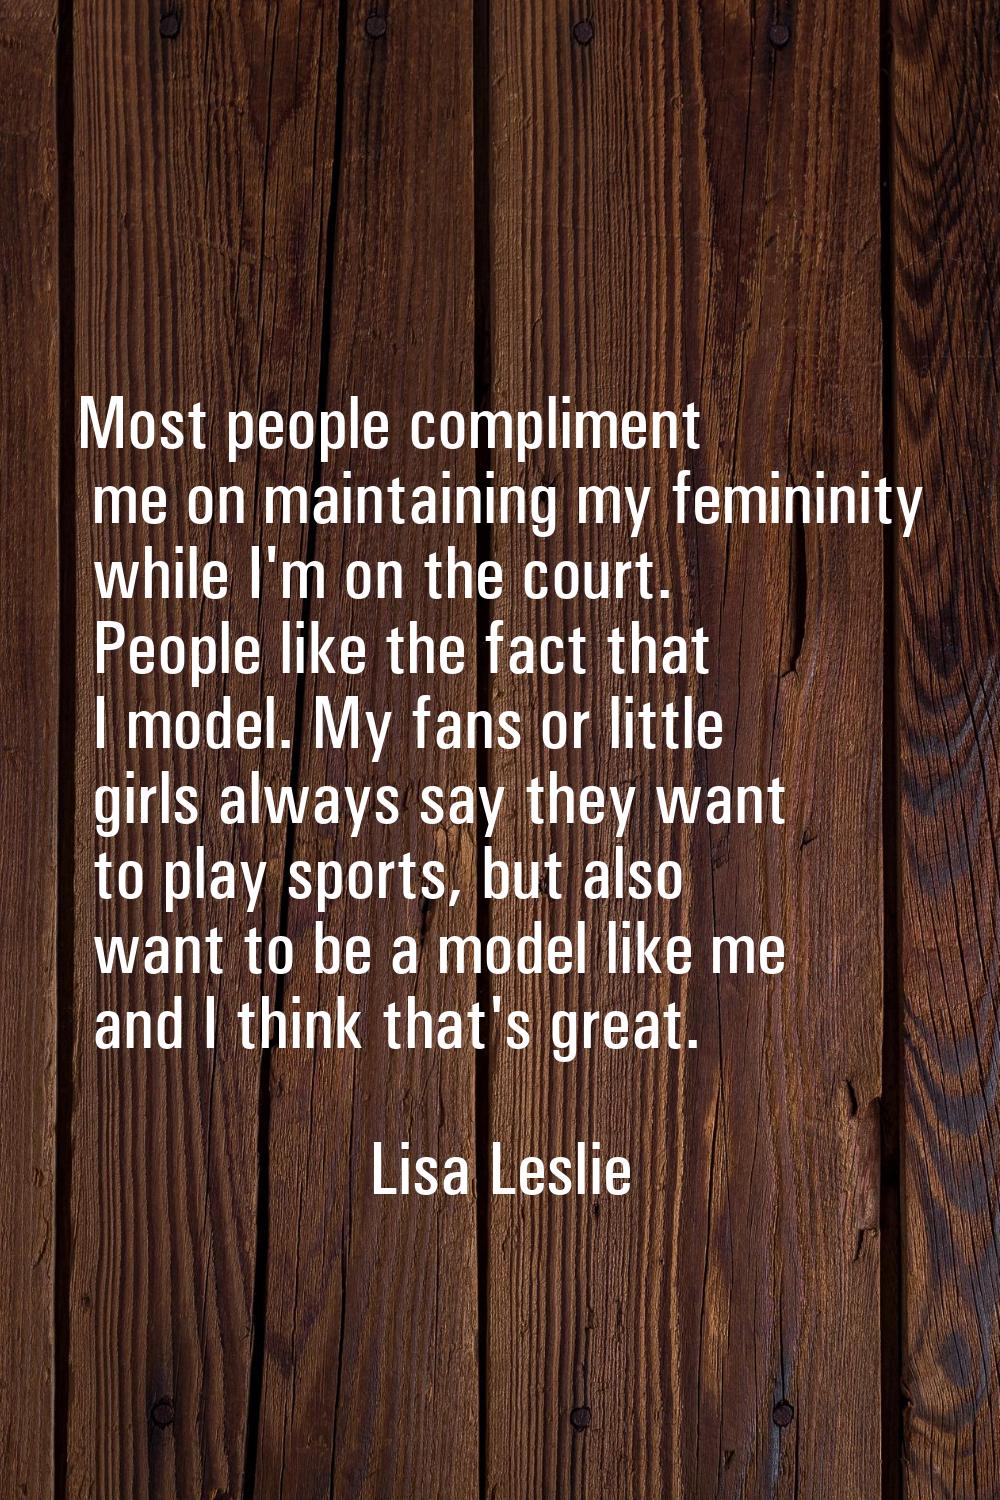 Most people compliment me on maintaining my femininity while I'm on the court. People like the fact